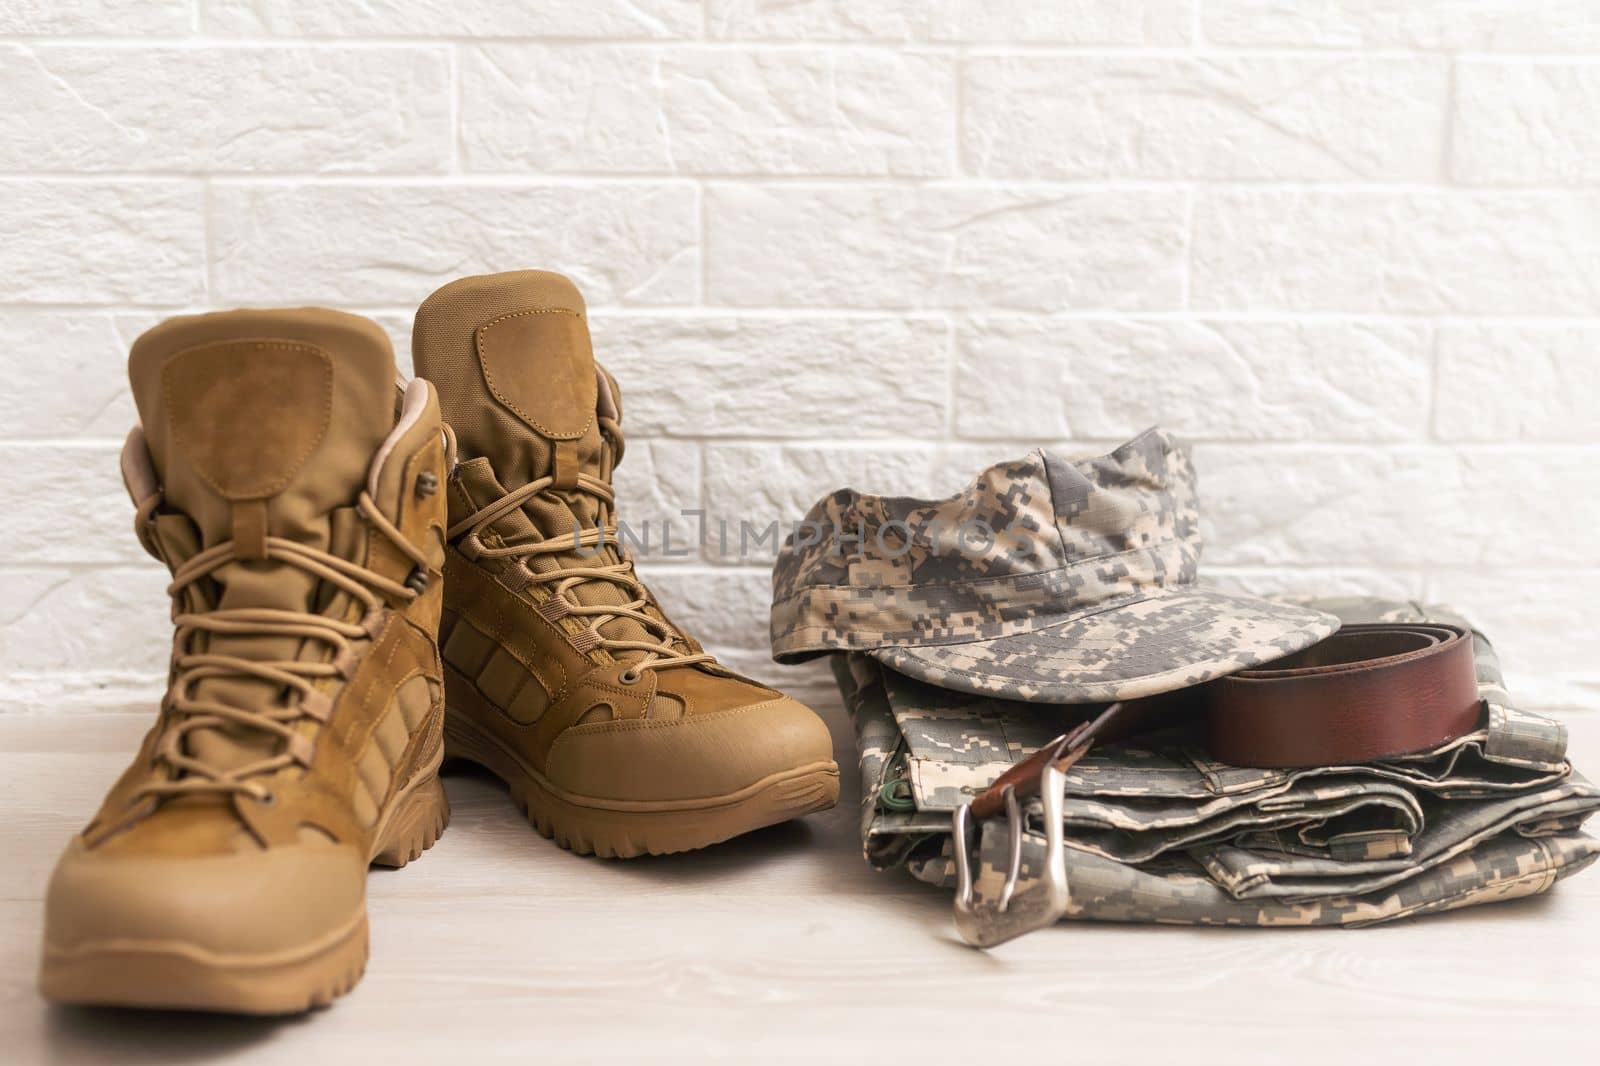 Set of military uniform on wooden background, close up view by Andelov13